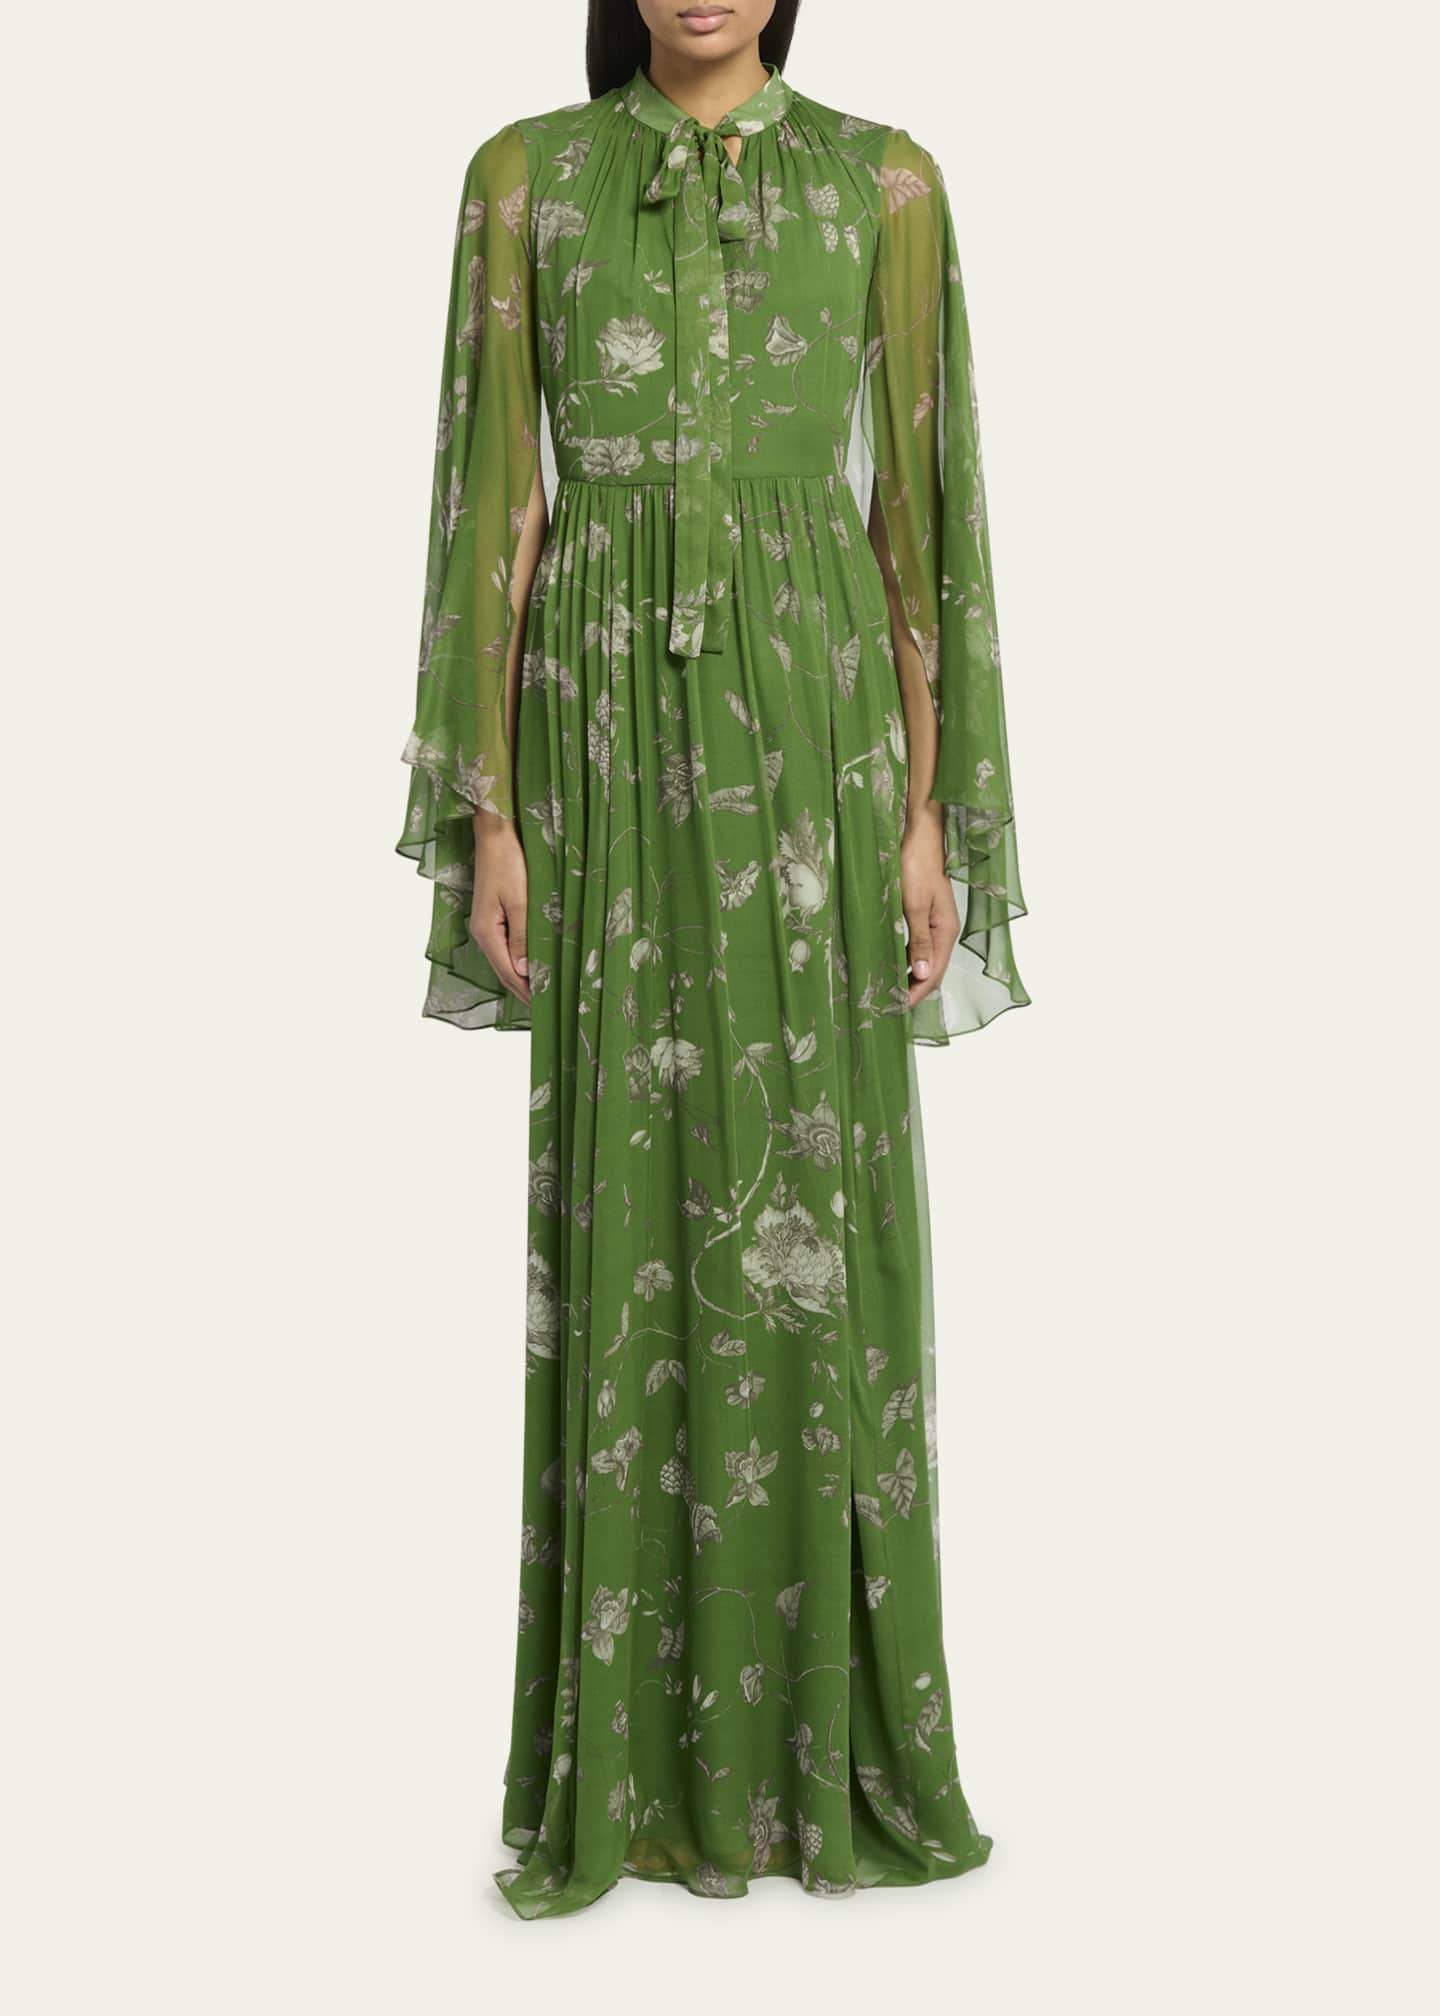 Erdem Floral Print Cape Effect Gown with Bow Neck Detail - Bergdorf Goodman